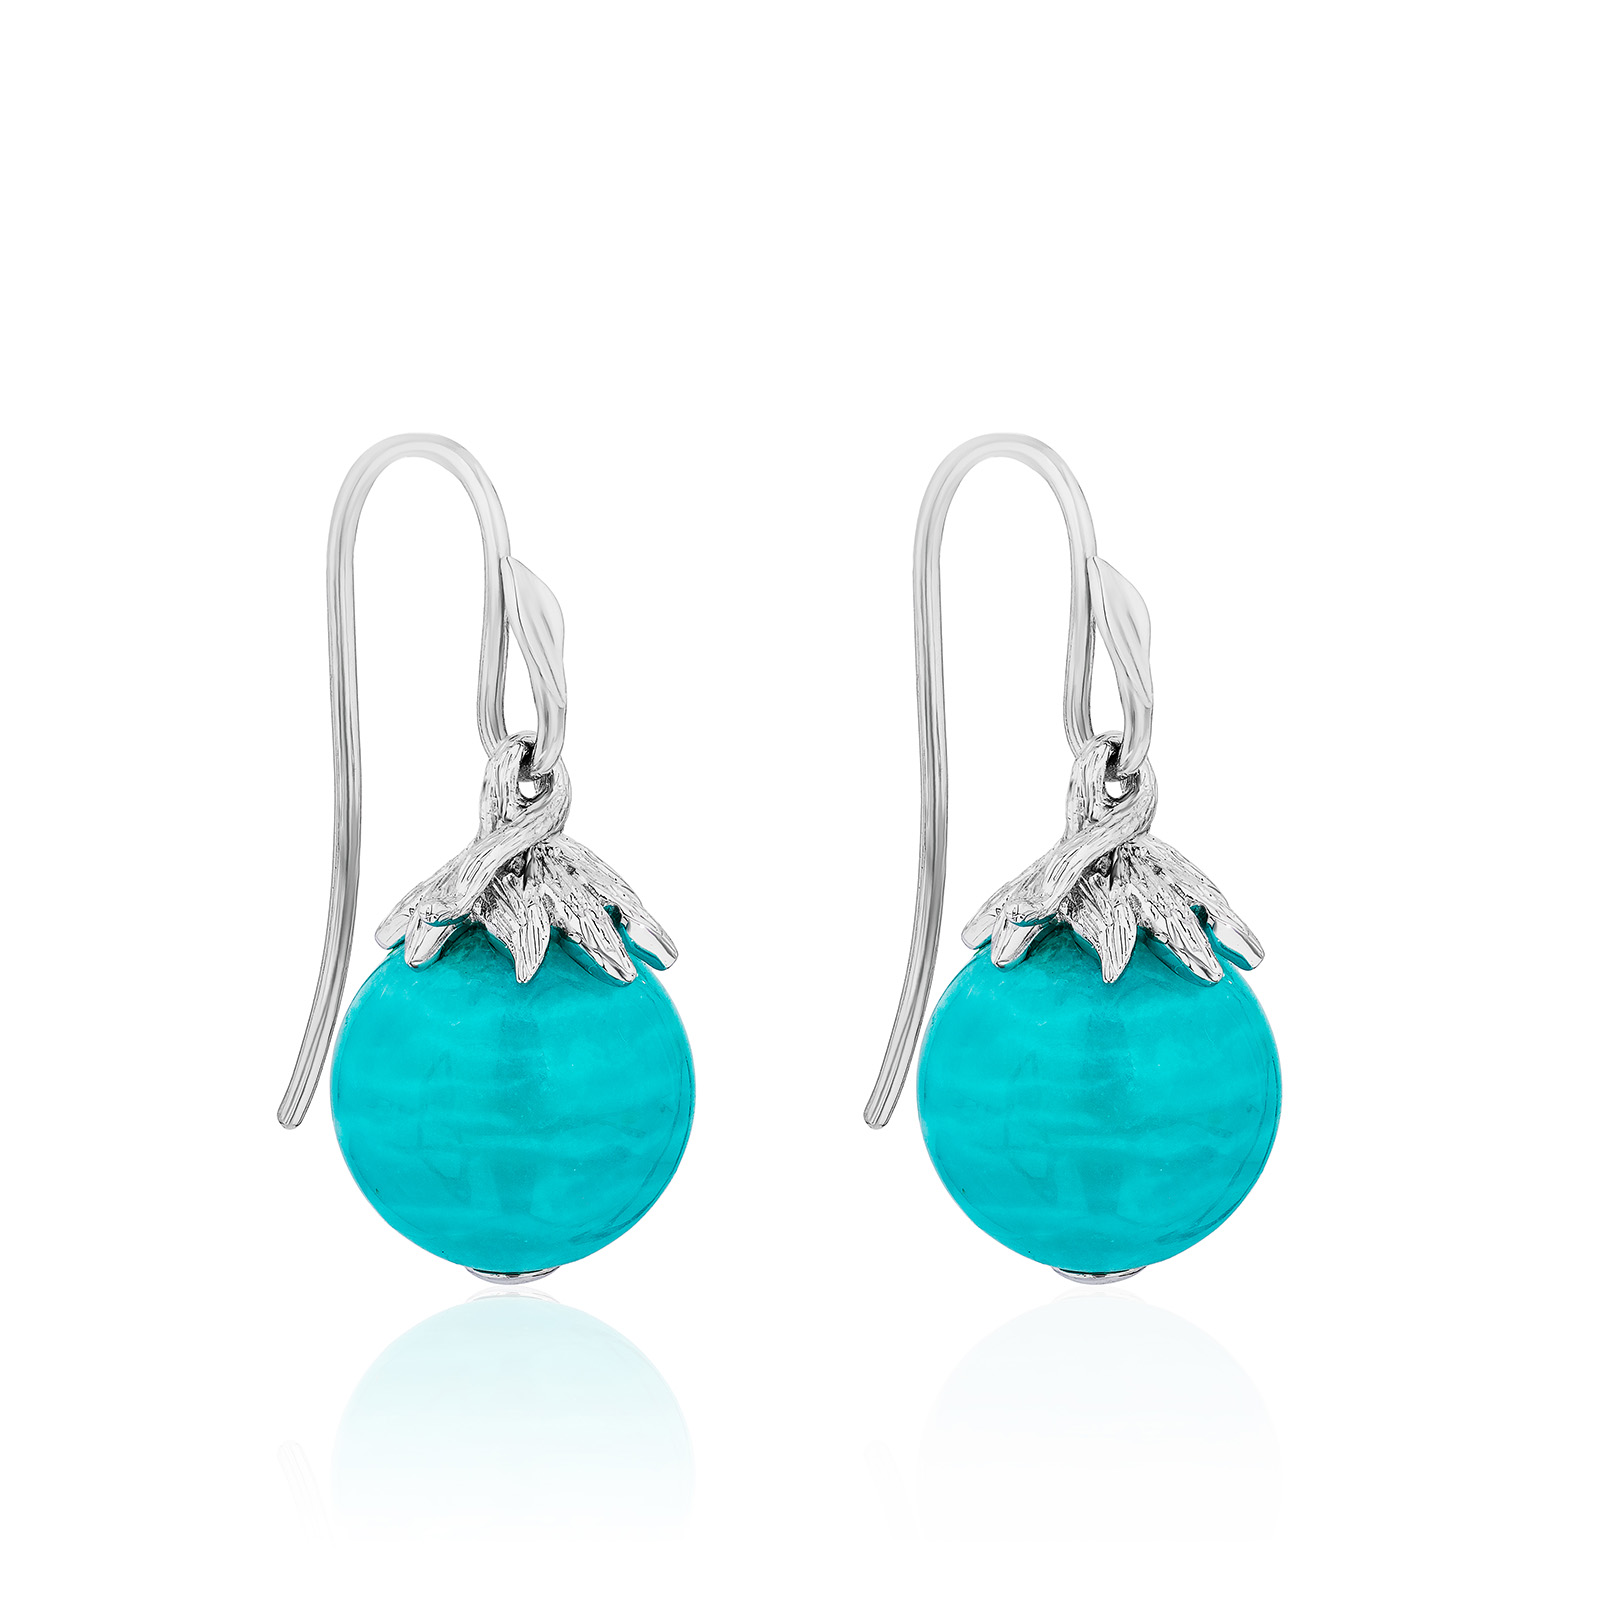 Berry Bead Gem Drop Pair in 18 karat white gold with a 12 mm Amazonite bead.